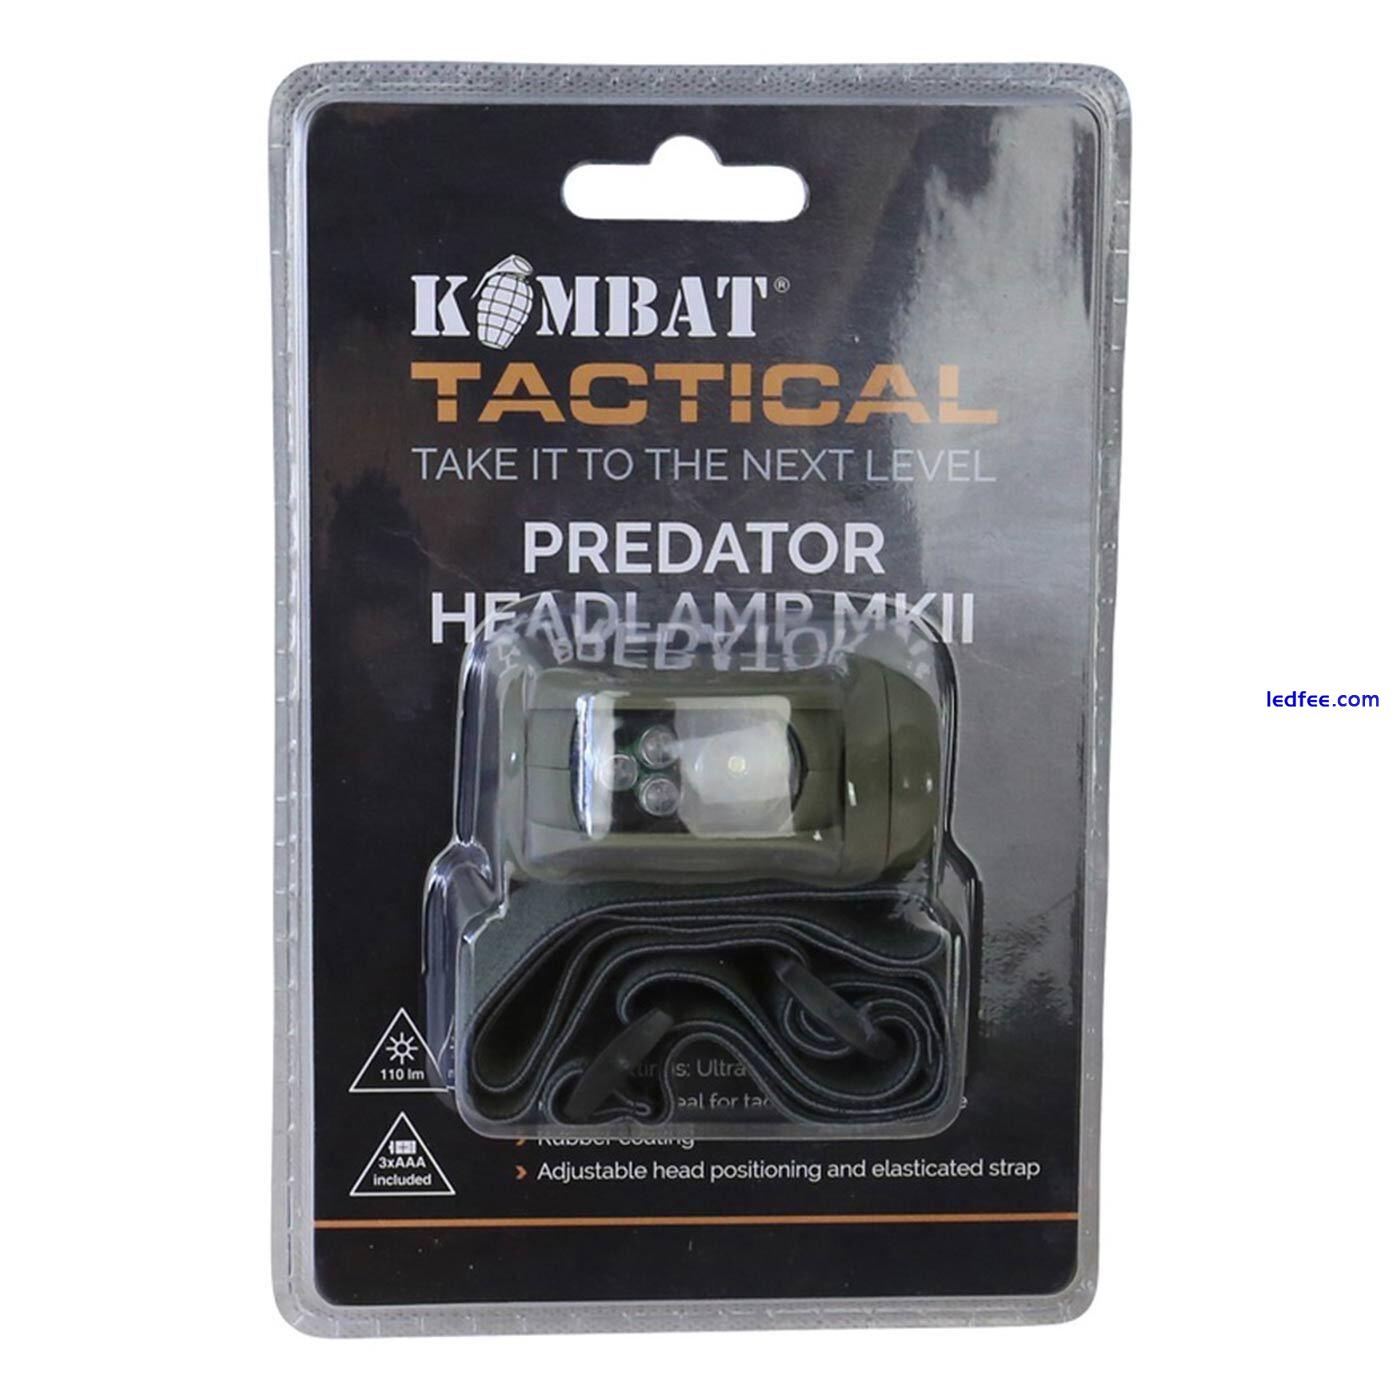 Predator II LED Head Torch White Red Light Tactical Military Army Cadet Headlamp 2 